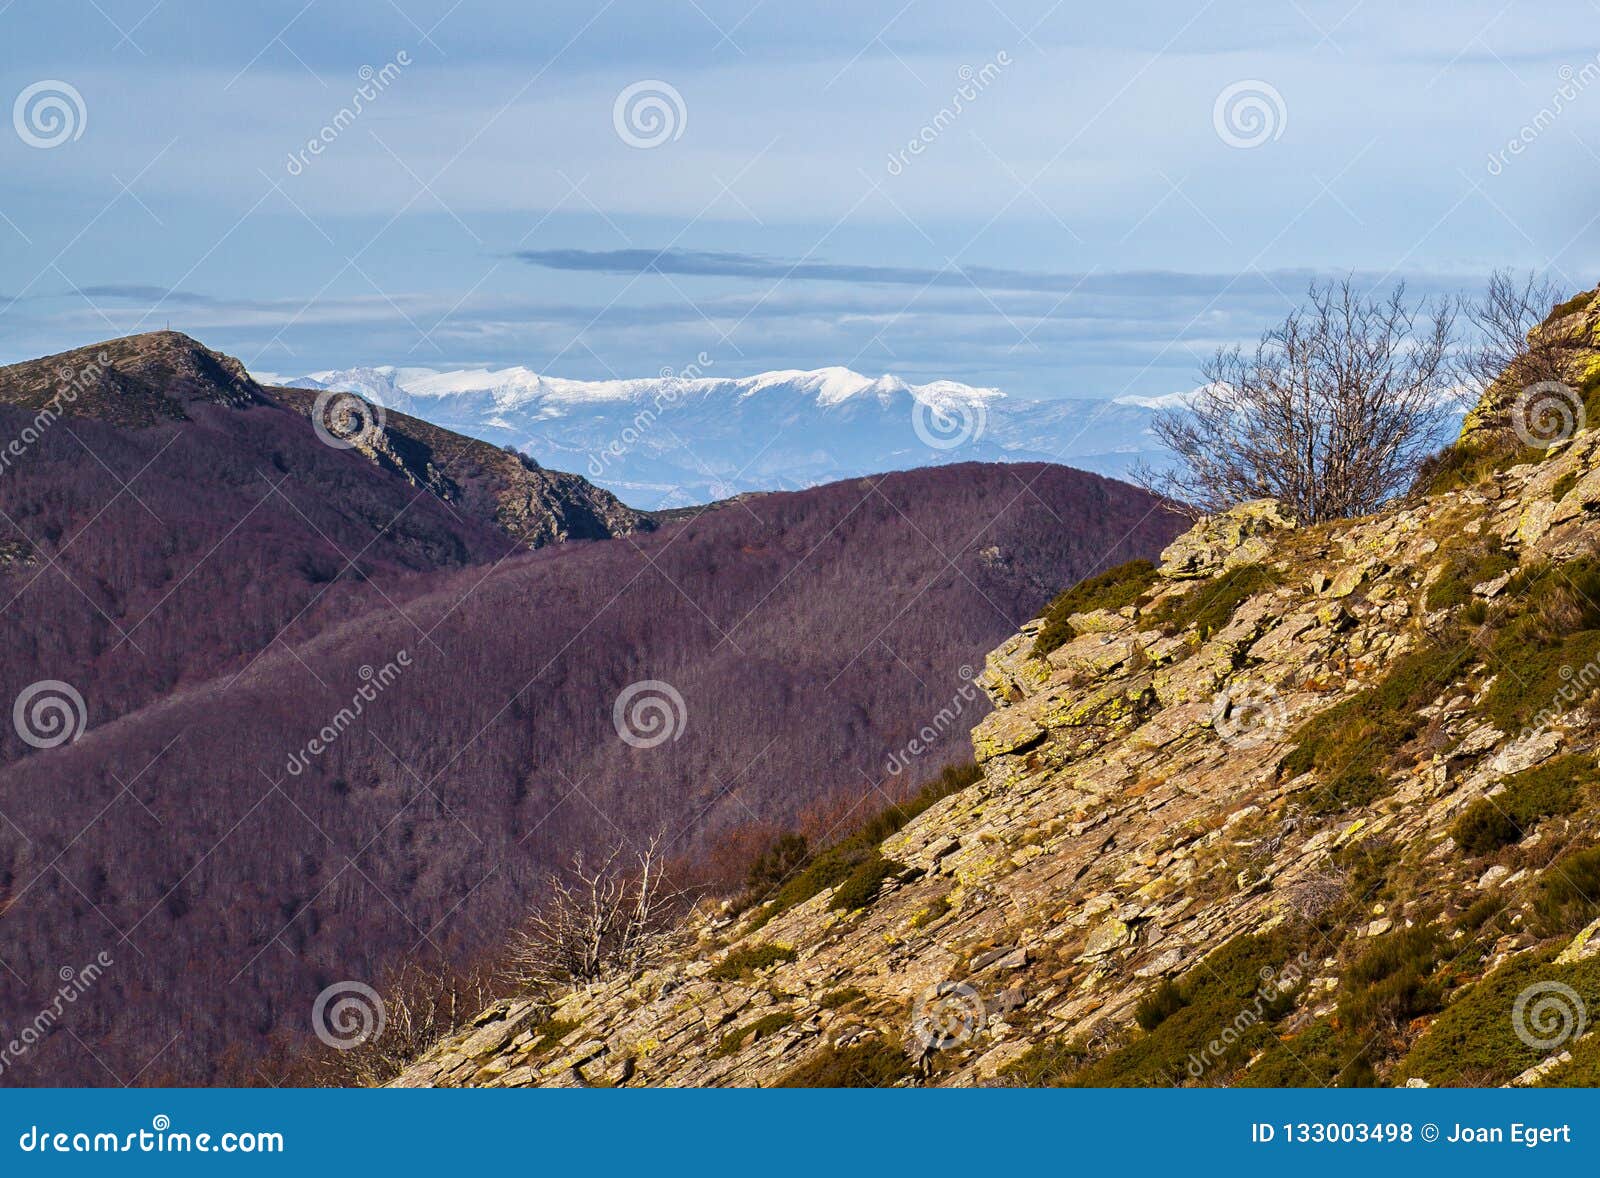 peaks view from montseny massif and pyrenees